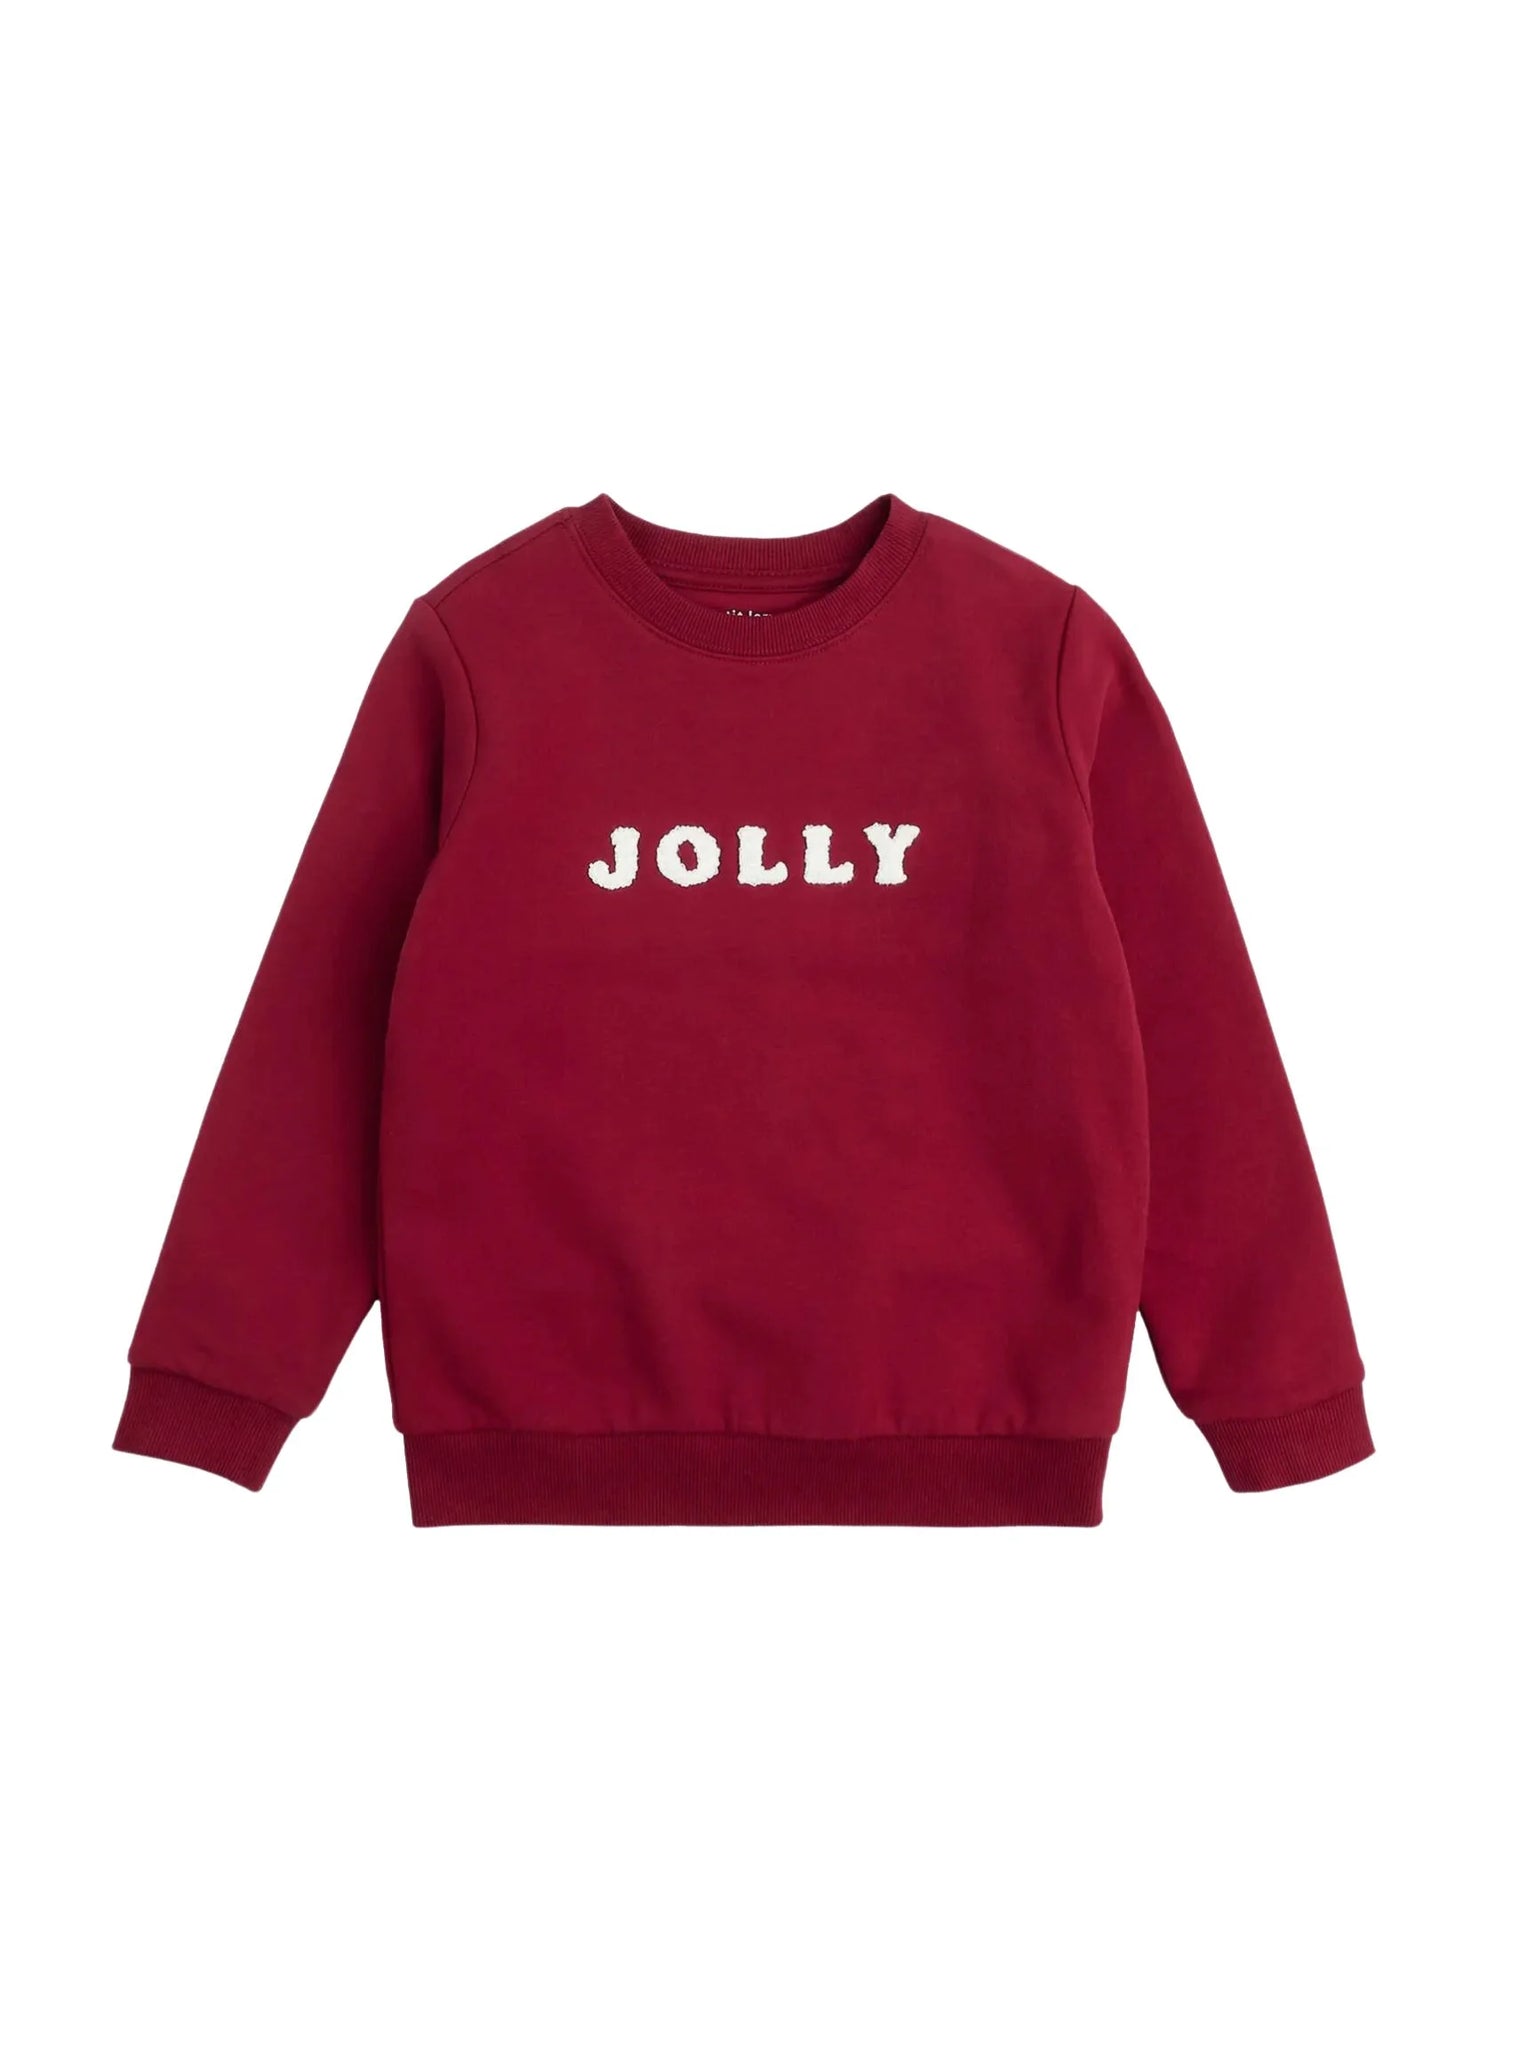 red long sleeve sweatshirt with words "Jolly" in center